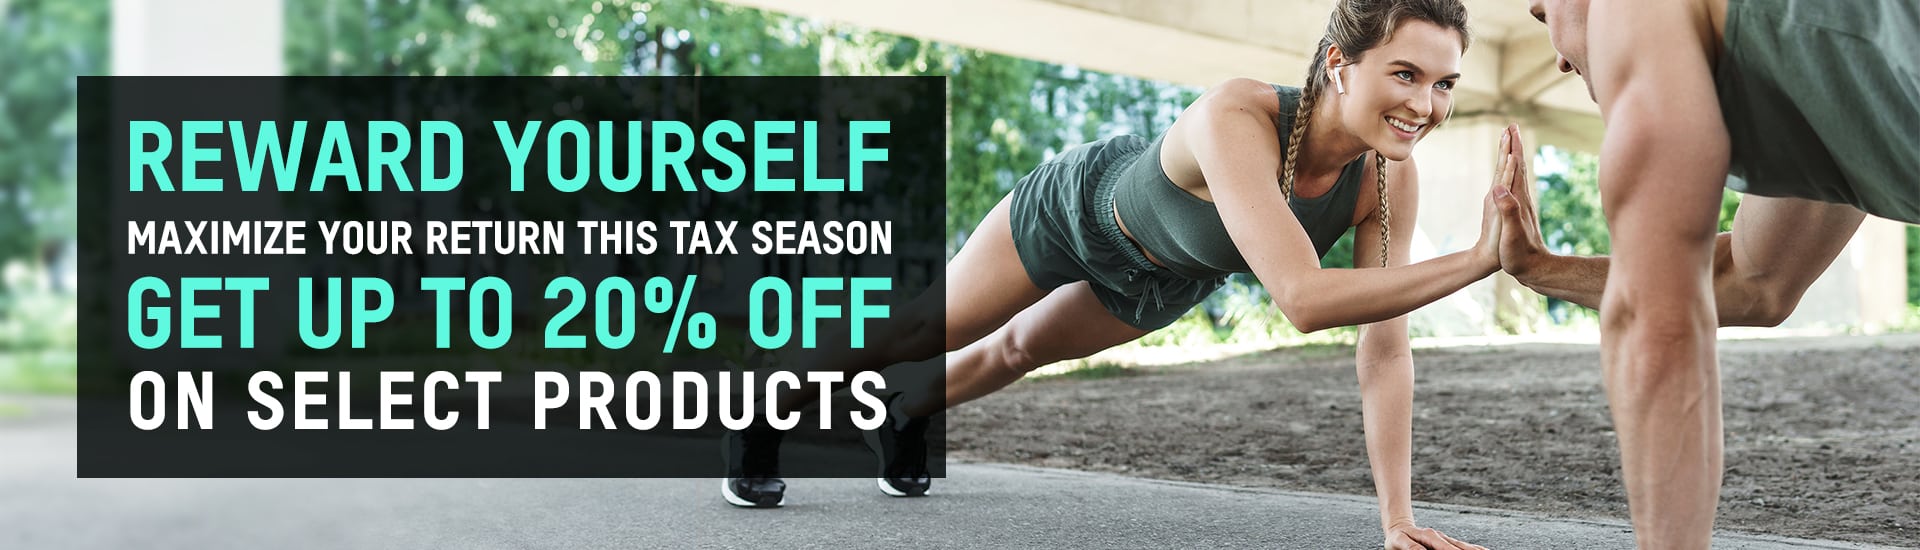 Advertisement banner created with Elementor, showing two women exercising outdoors with a text overlay offering up to 20% off on select products.